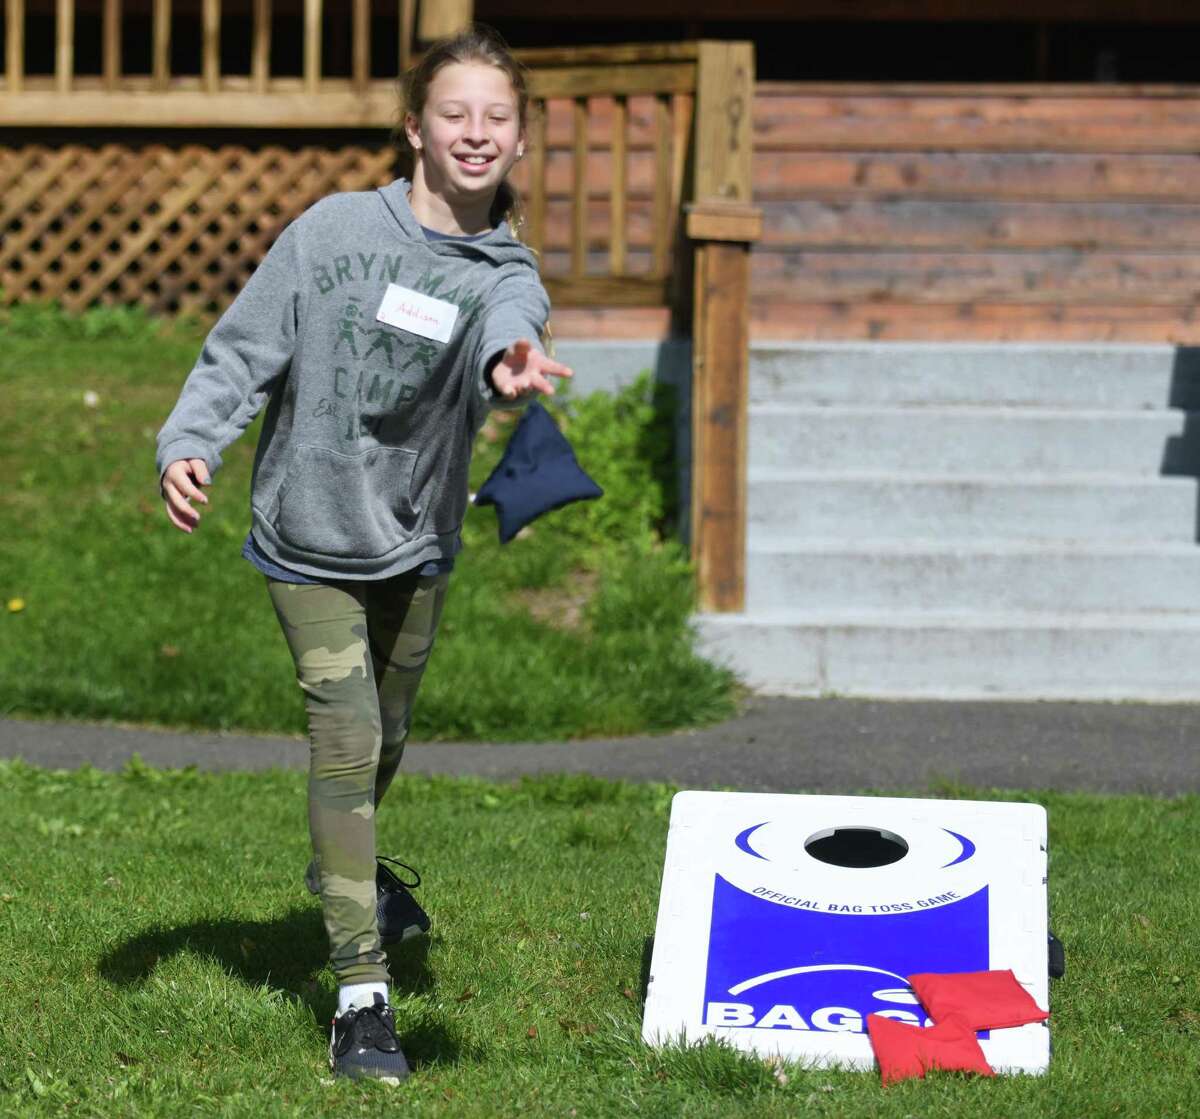 Fifth grader Addison Schamberg throws a beanbag at the Greenwich Public Schools Orientation Adventure Days at Camp Seton in Greenwich, Conn. on Wednesday, April 27, 2022. The two-decade tradition is designed to give fifth-grade students the opportunity to meet and interact with students who will be in their sixth-grade class in college next year.  The one-day camp included fun team-building activities like orienteering, rock climbing, rope balancing, bean bag tossing, ladder ball, and more.